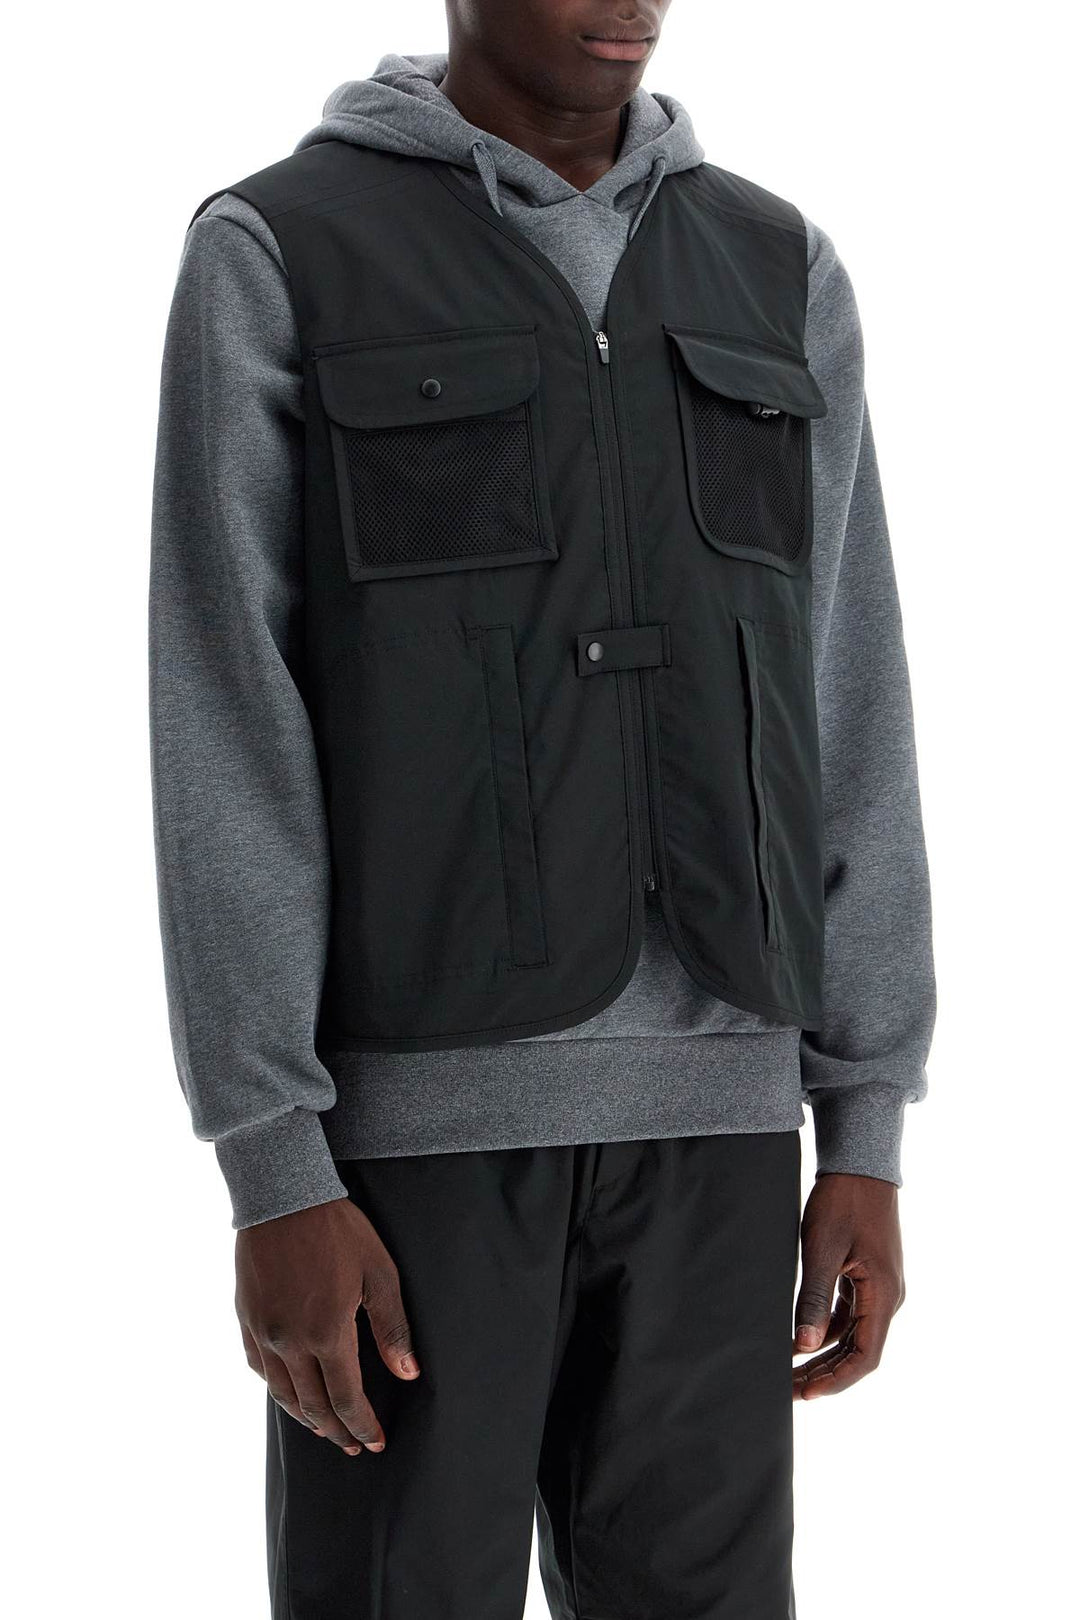 A.P.C. Replace With Double Quotealban Technical Fabric Vest For   Black